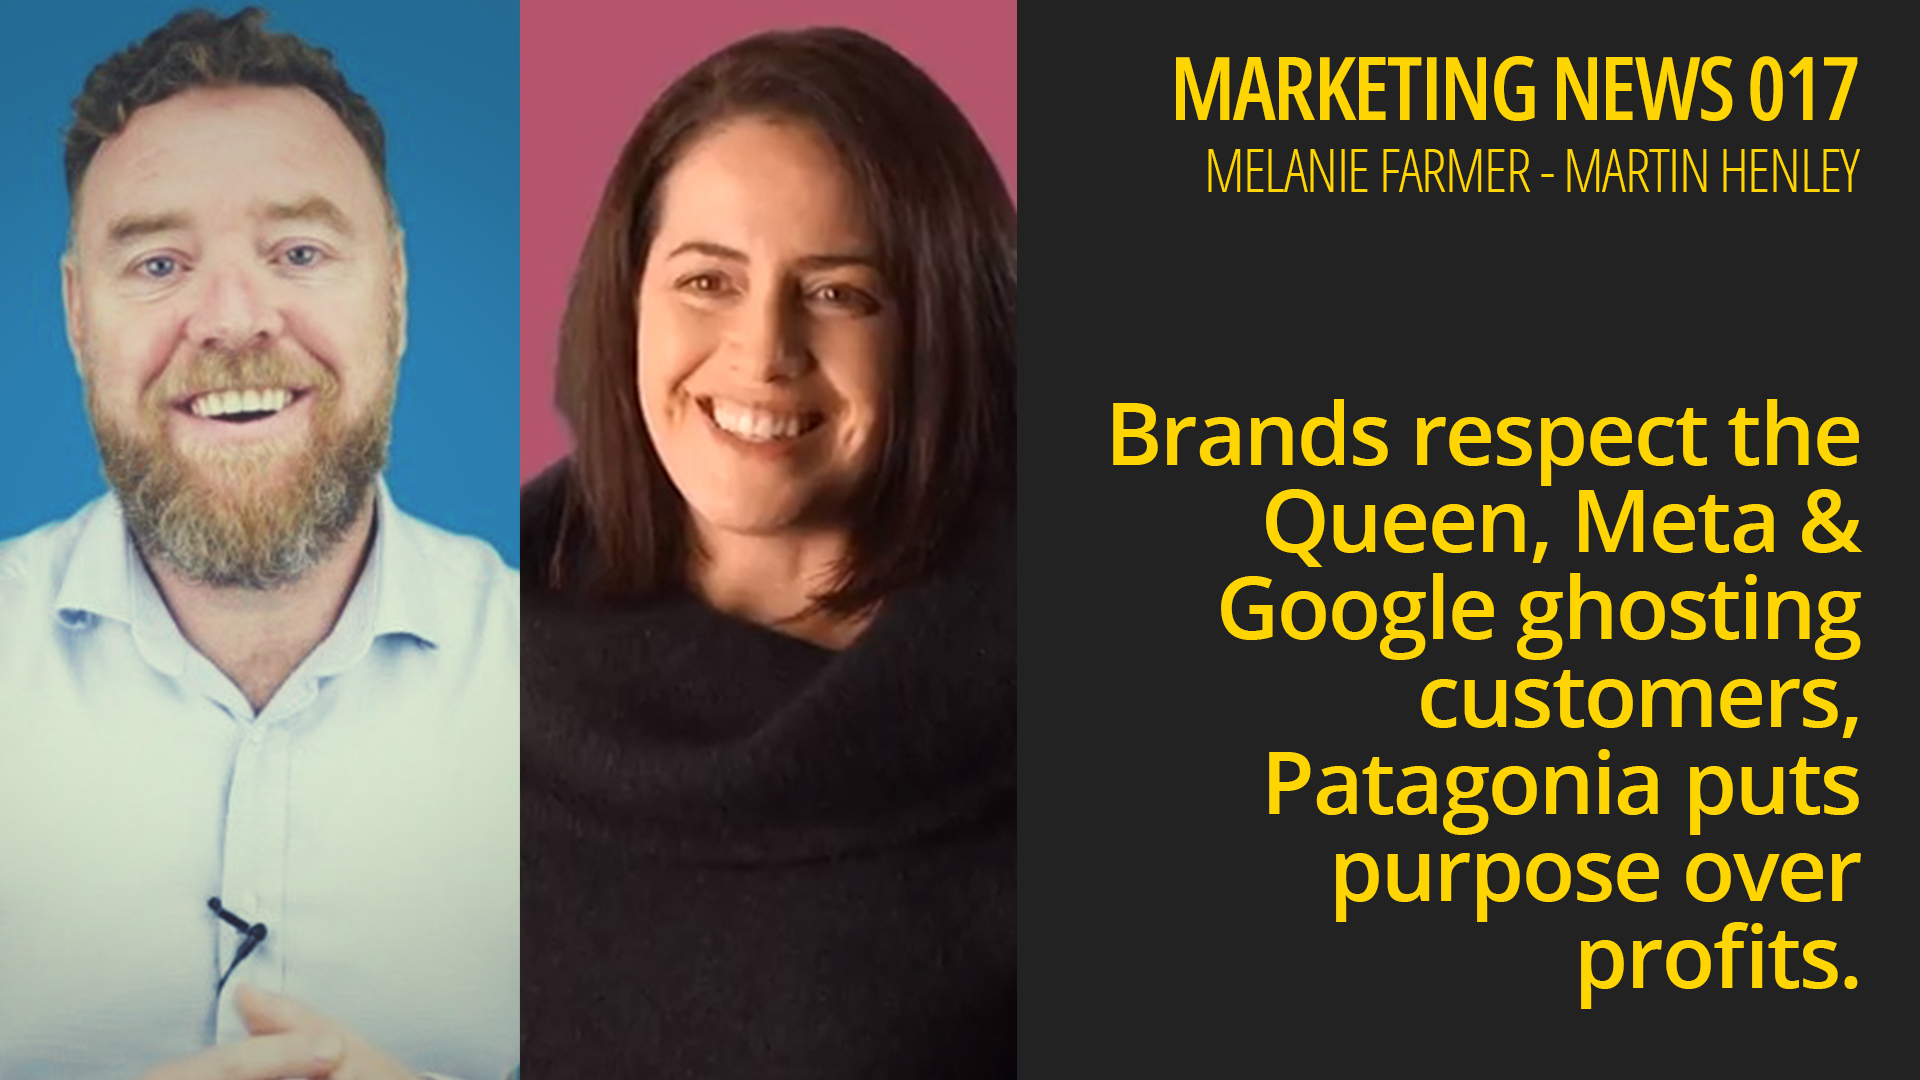 Brands respect the Queen, Meta ghost customers, Patagonia purpose over profits – Marketing News 017